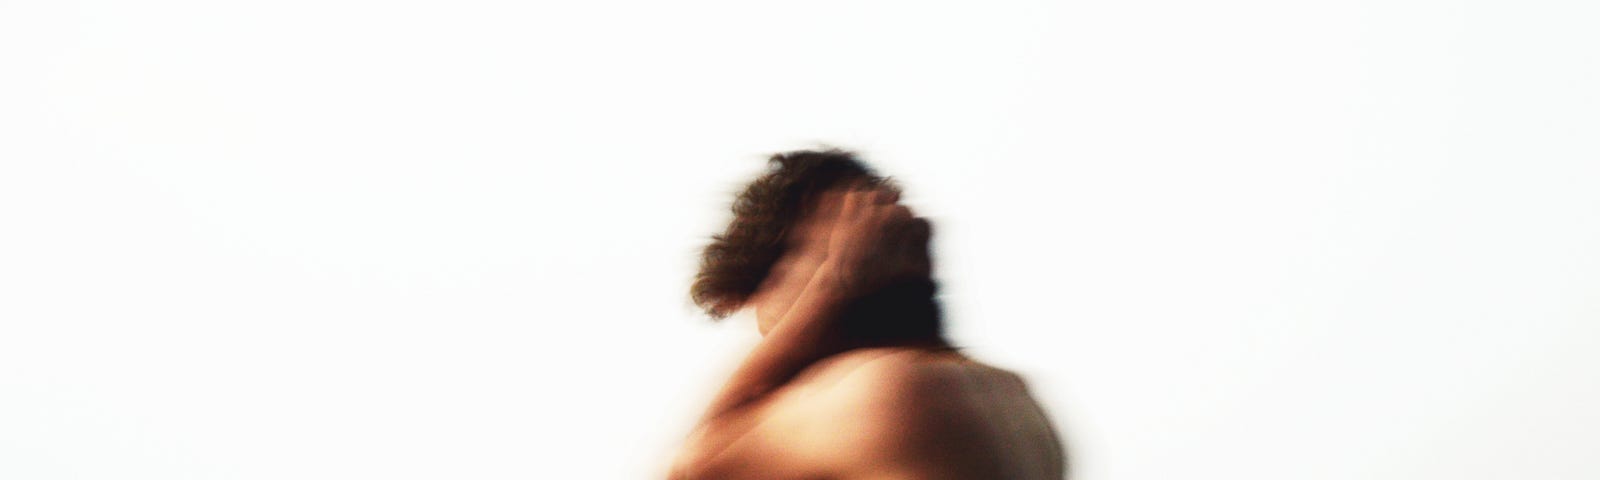 Blurred photo of shirtless man covering his ears